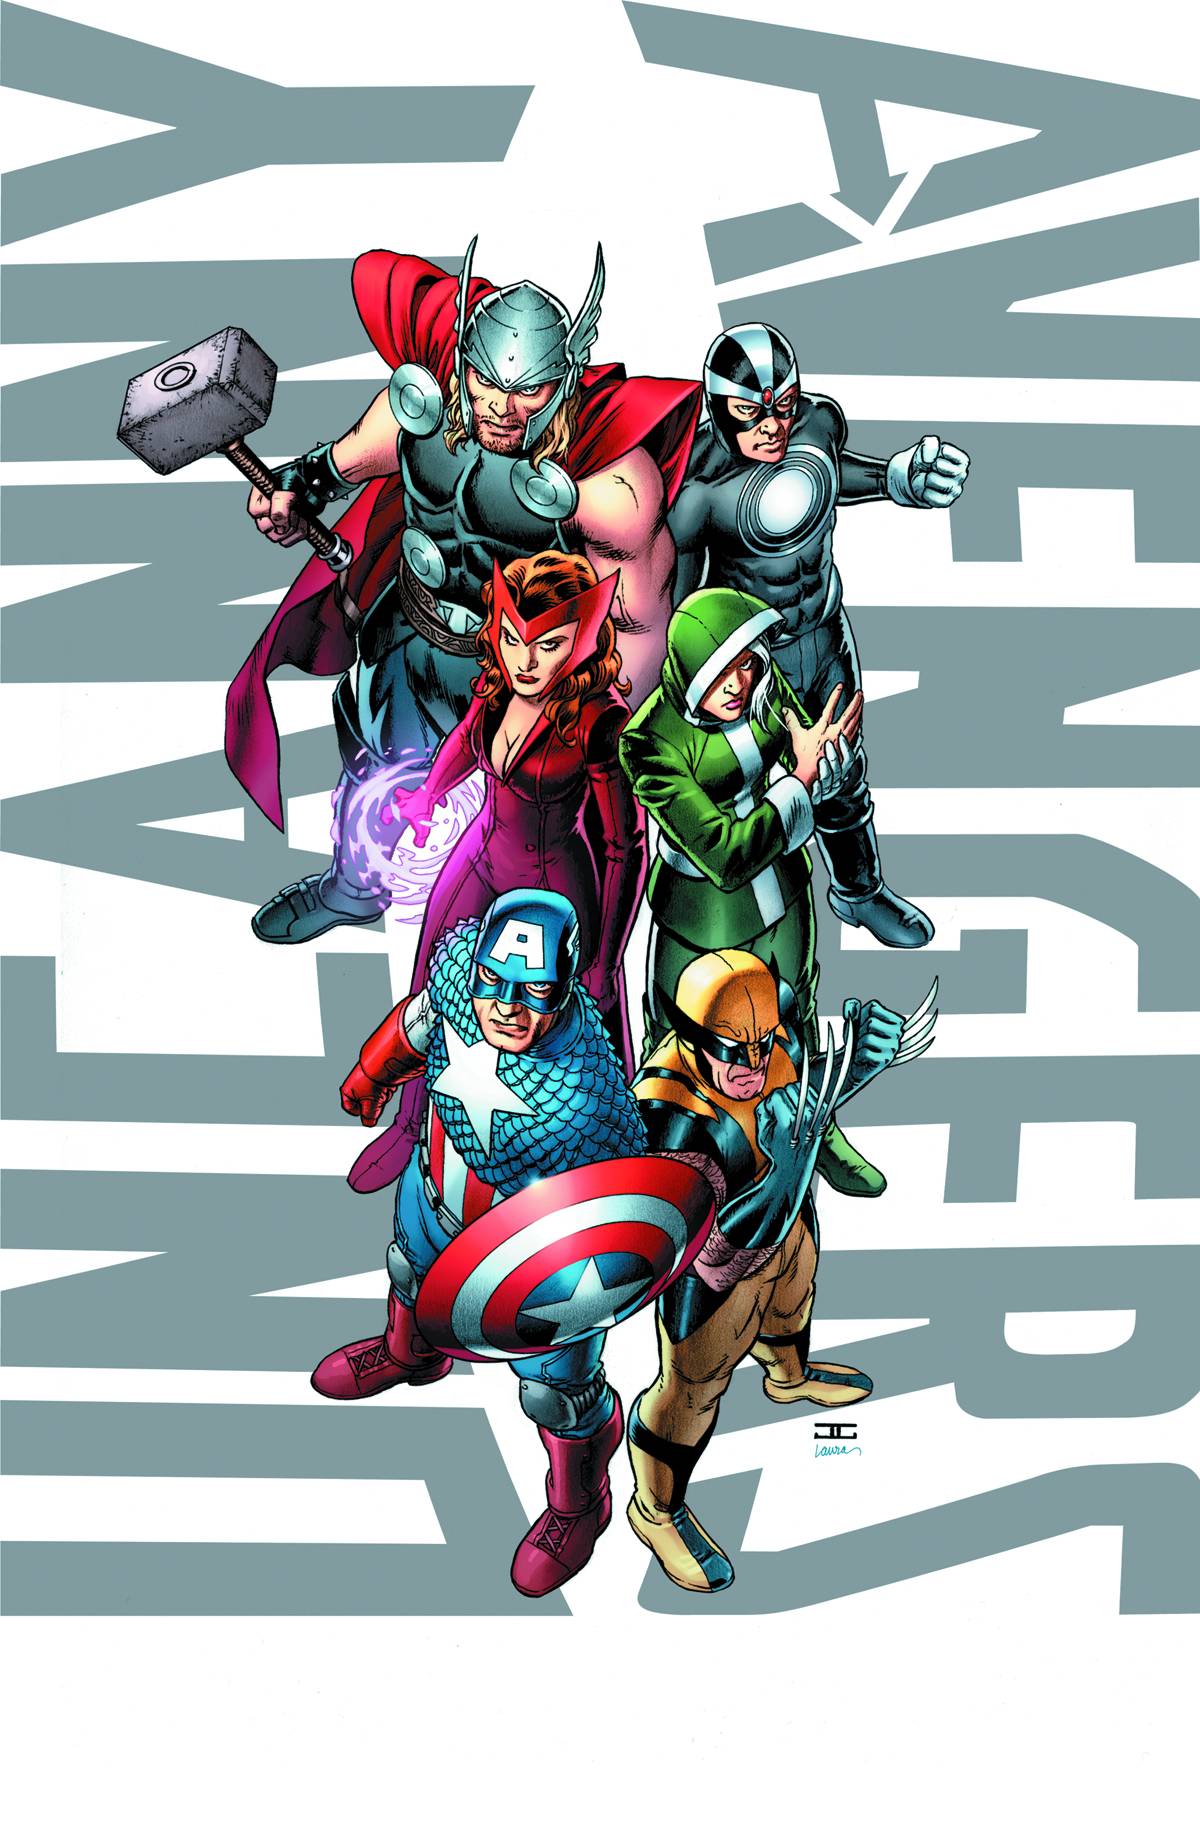 UNCANNY AVENGERS BY CASSADAY POSTER NOW